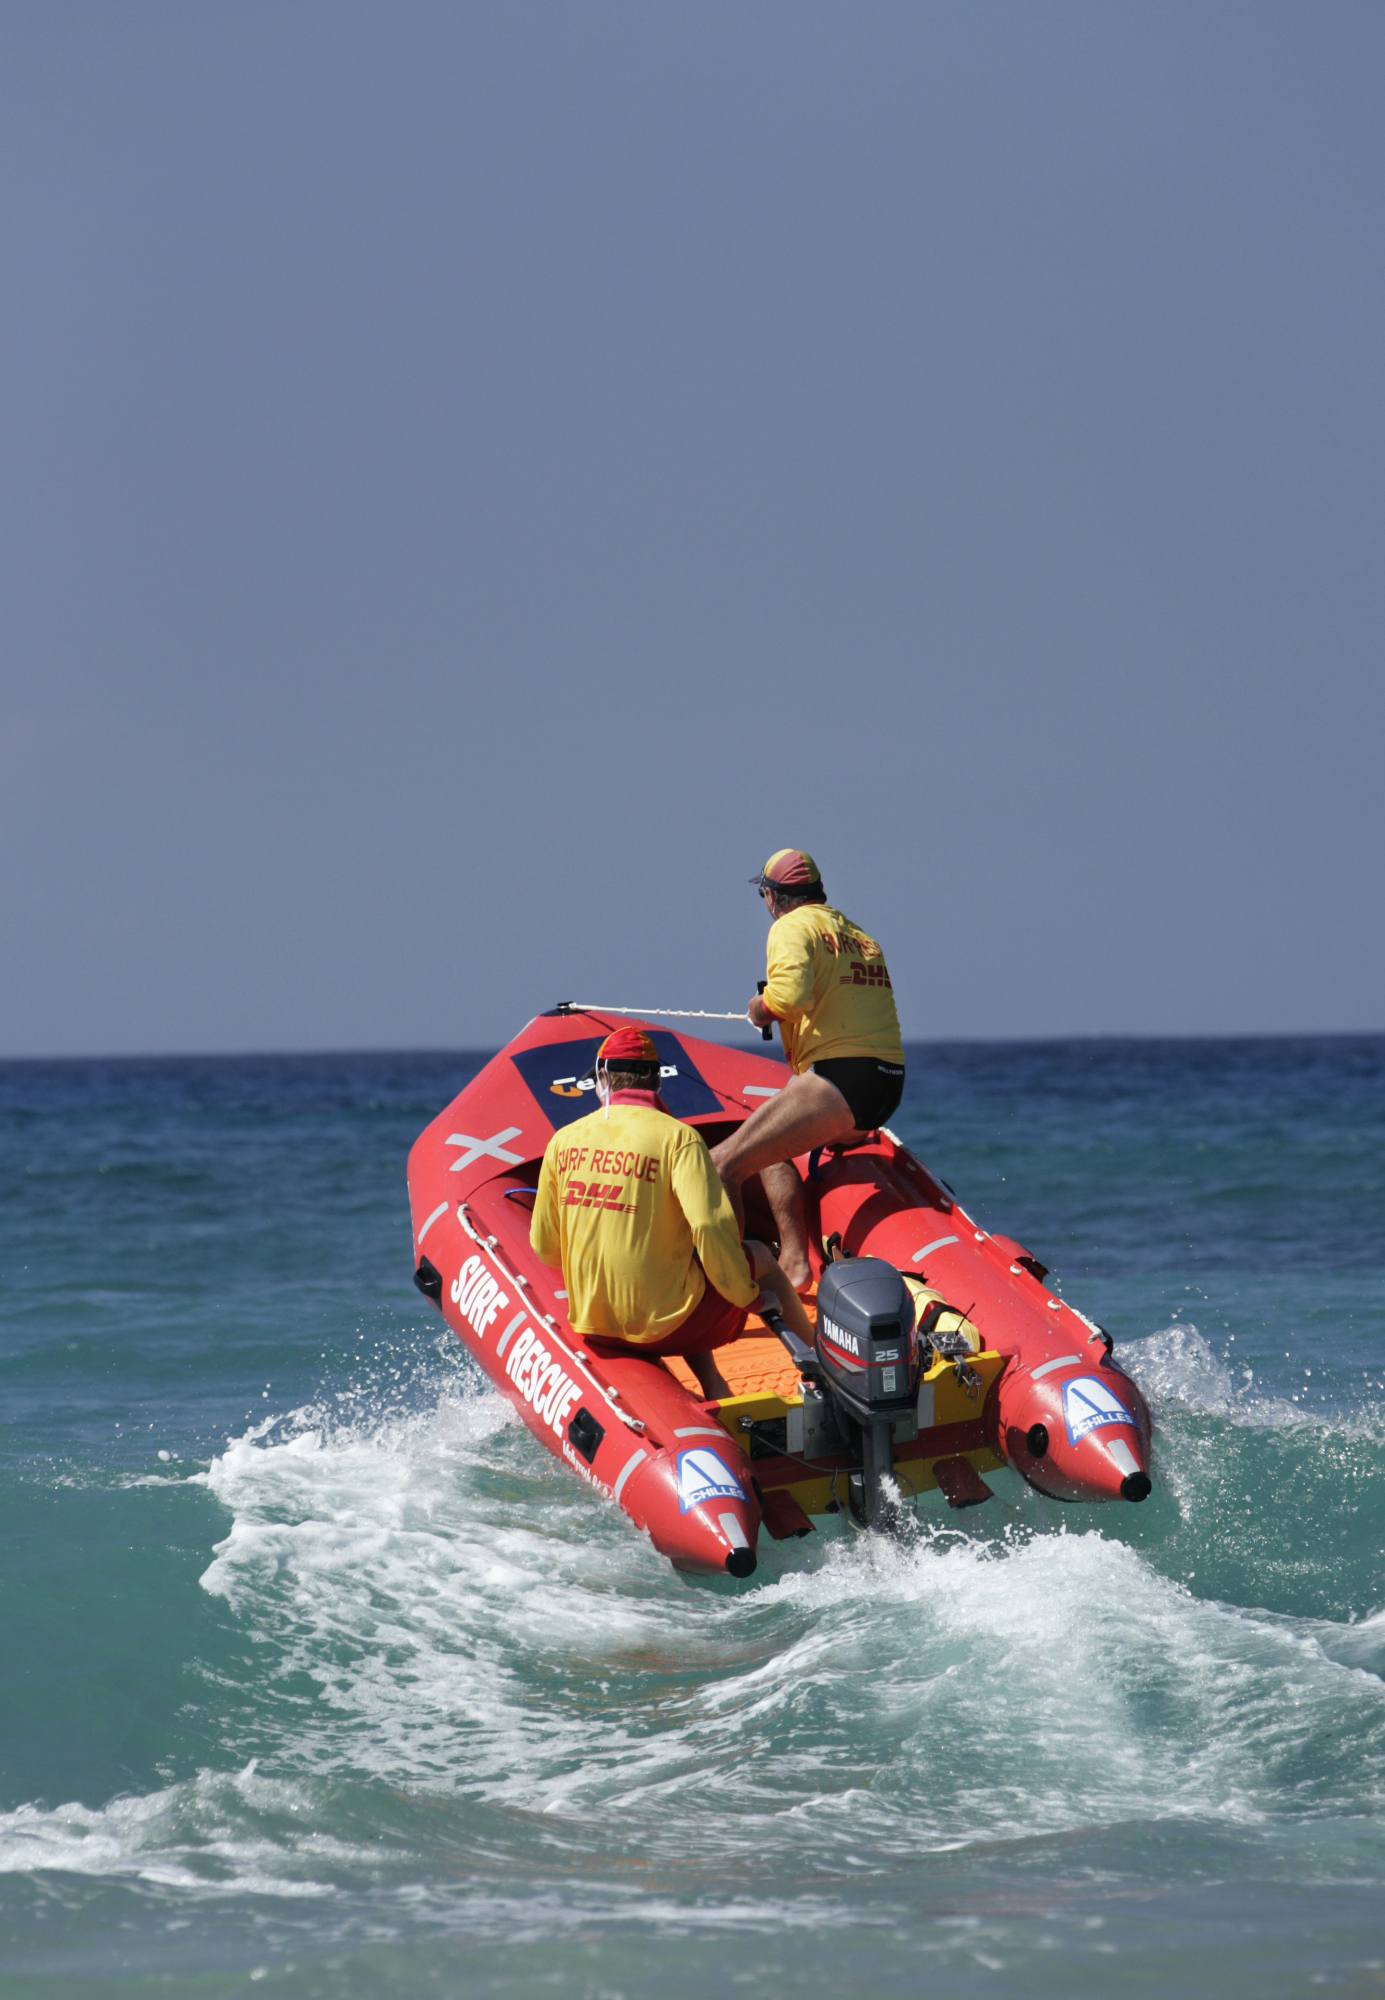 Surf lifesavers in an Inflatable Rescue Boat, Mollymook, New South Wales, 2006.